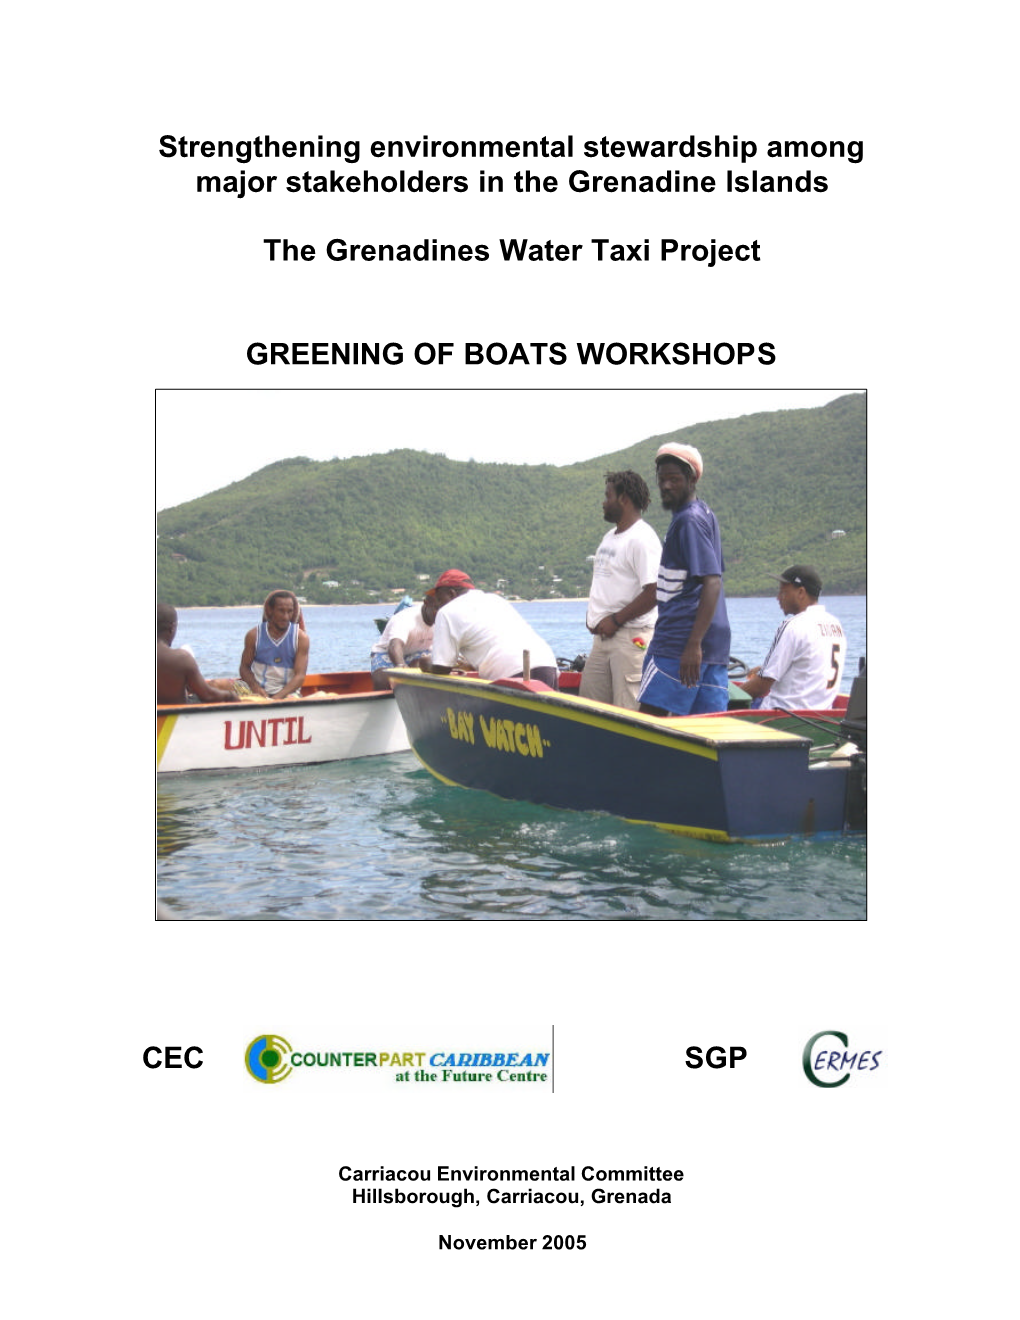 Grenadines Water Taxi Greening of Boats Workshop